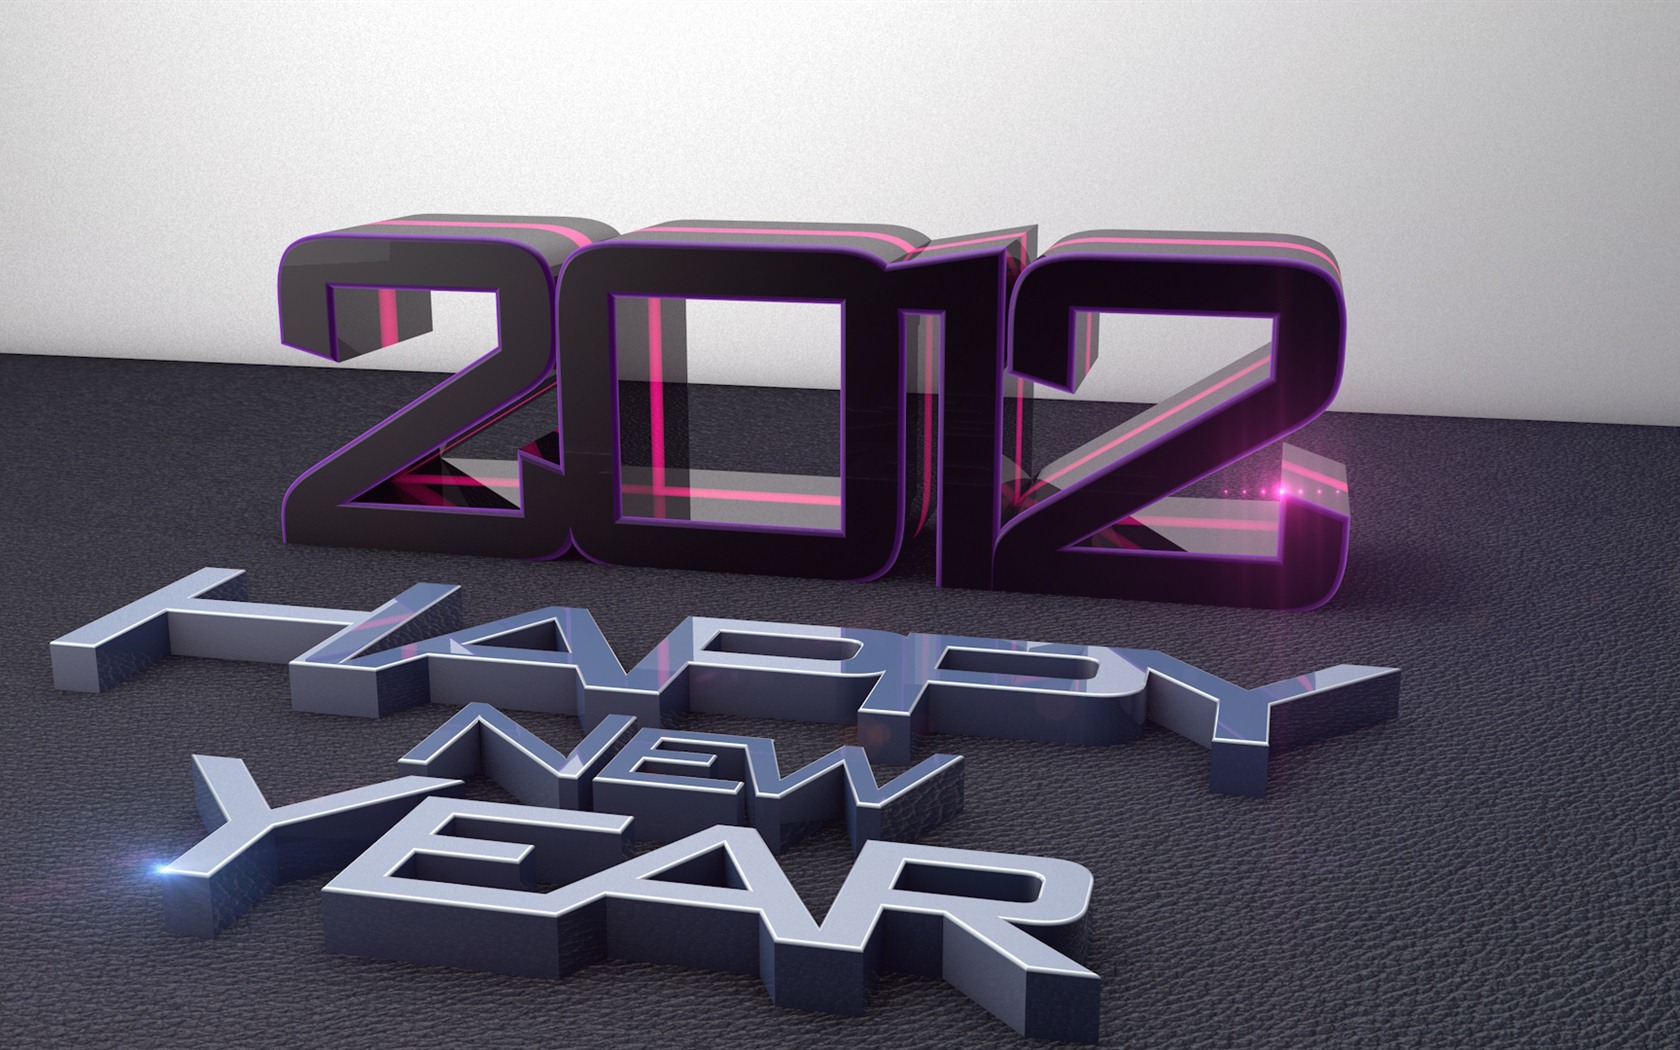 2012 New Year wallpapers (1) #6 - 1680x1050